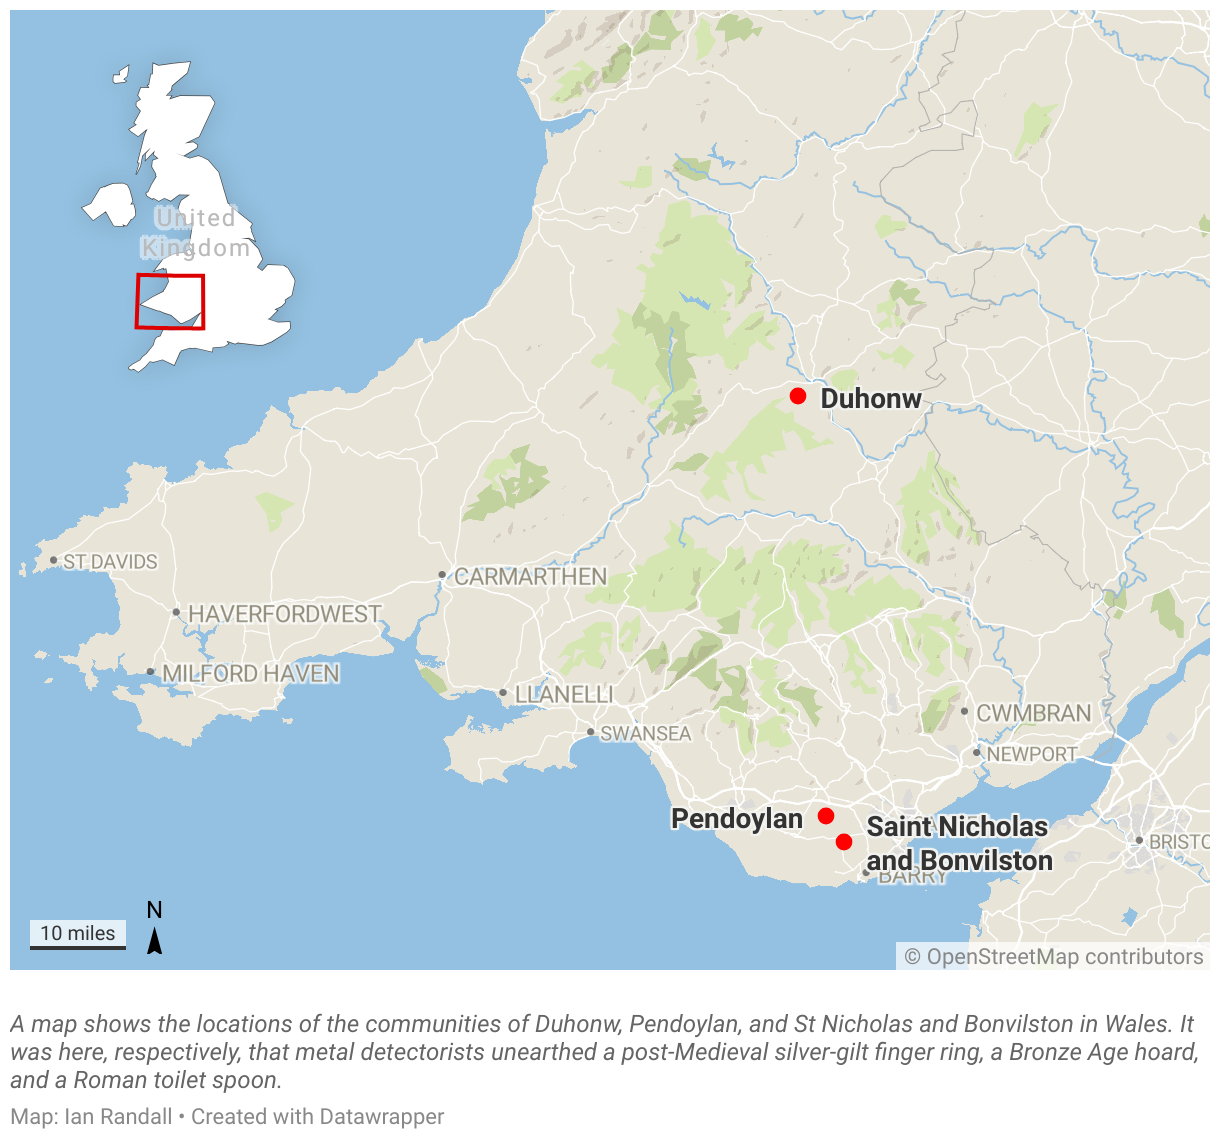 A map shows the locations of the communities of Duhonw, Pendoylan, and St Nicholas and Bonvilston in Wales.